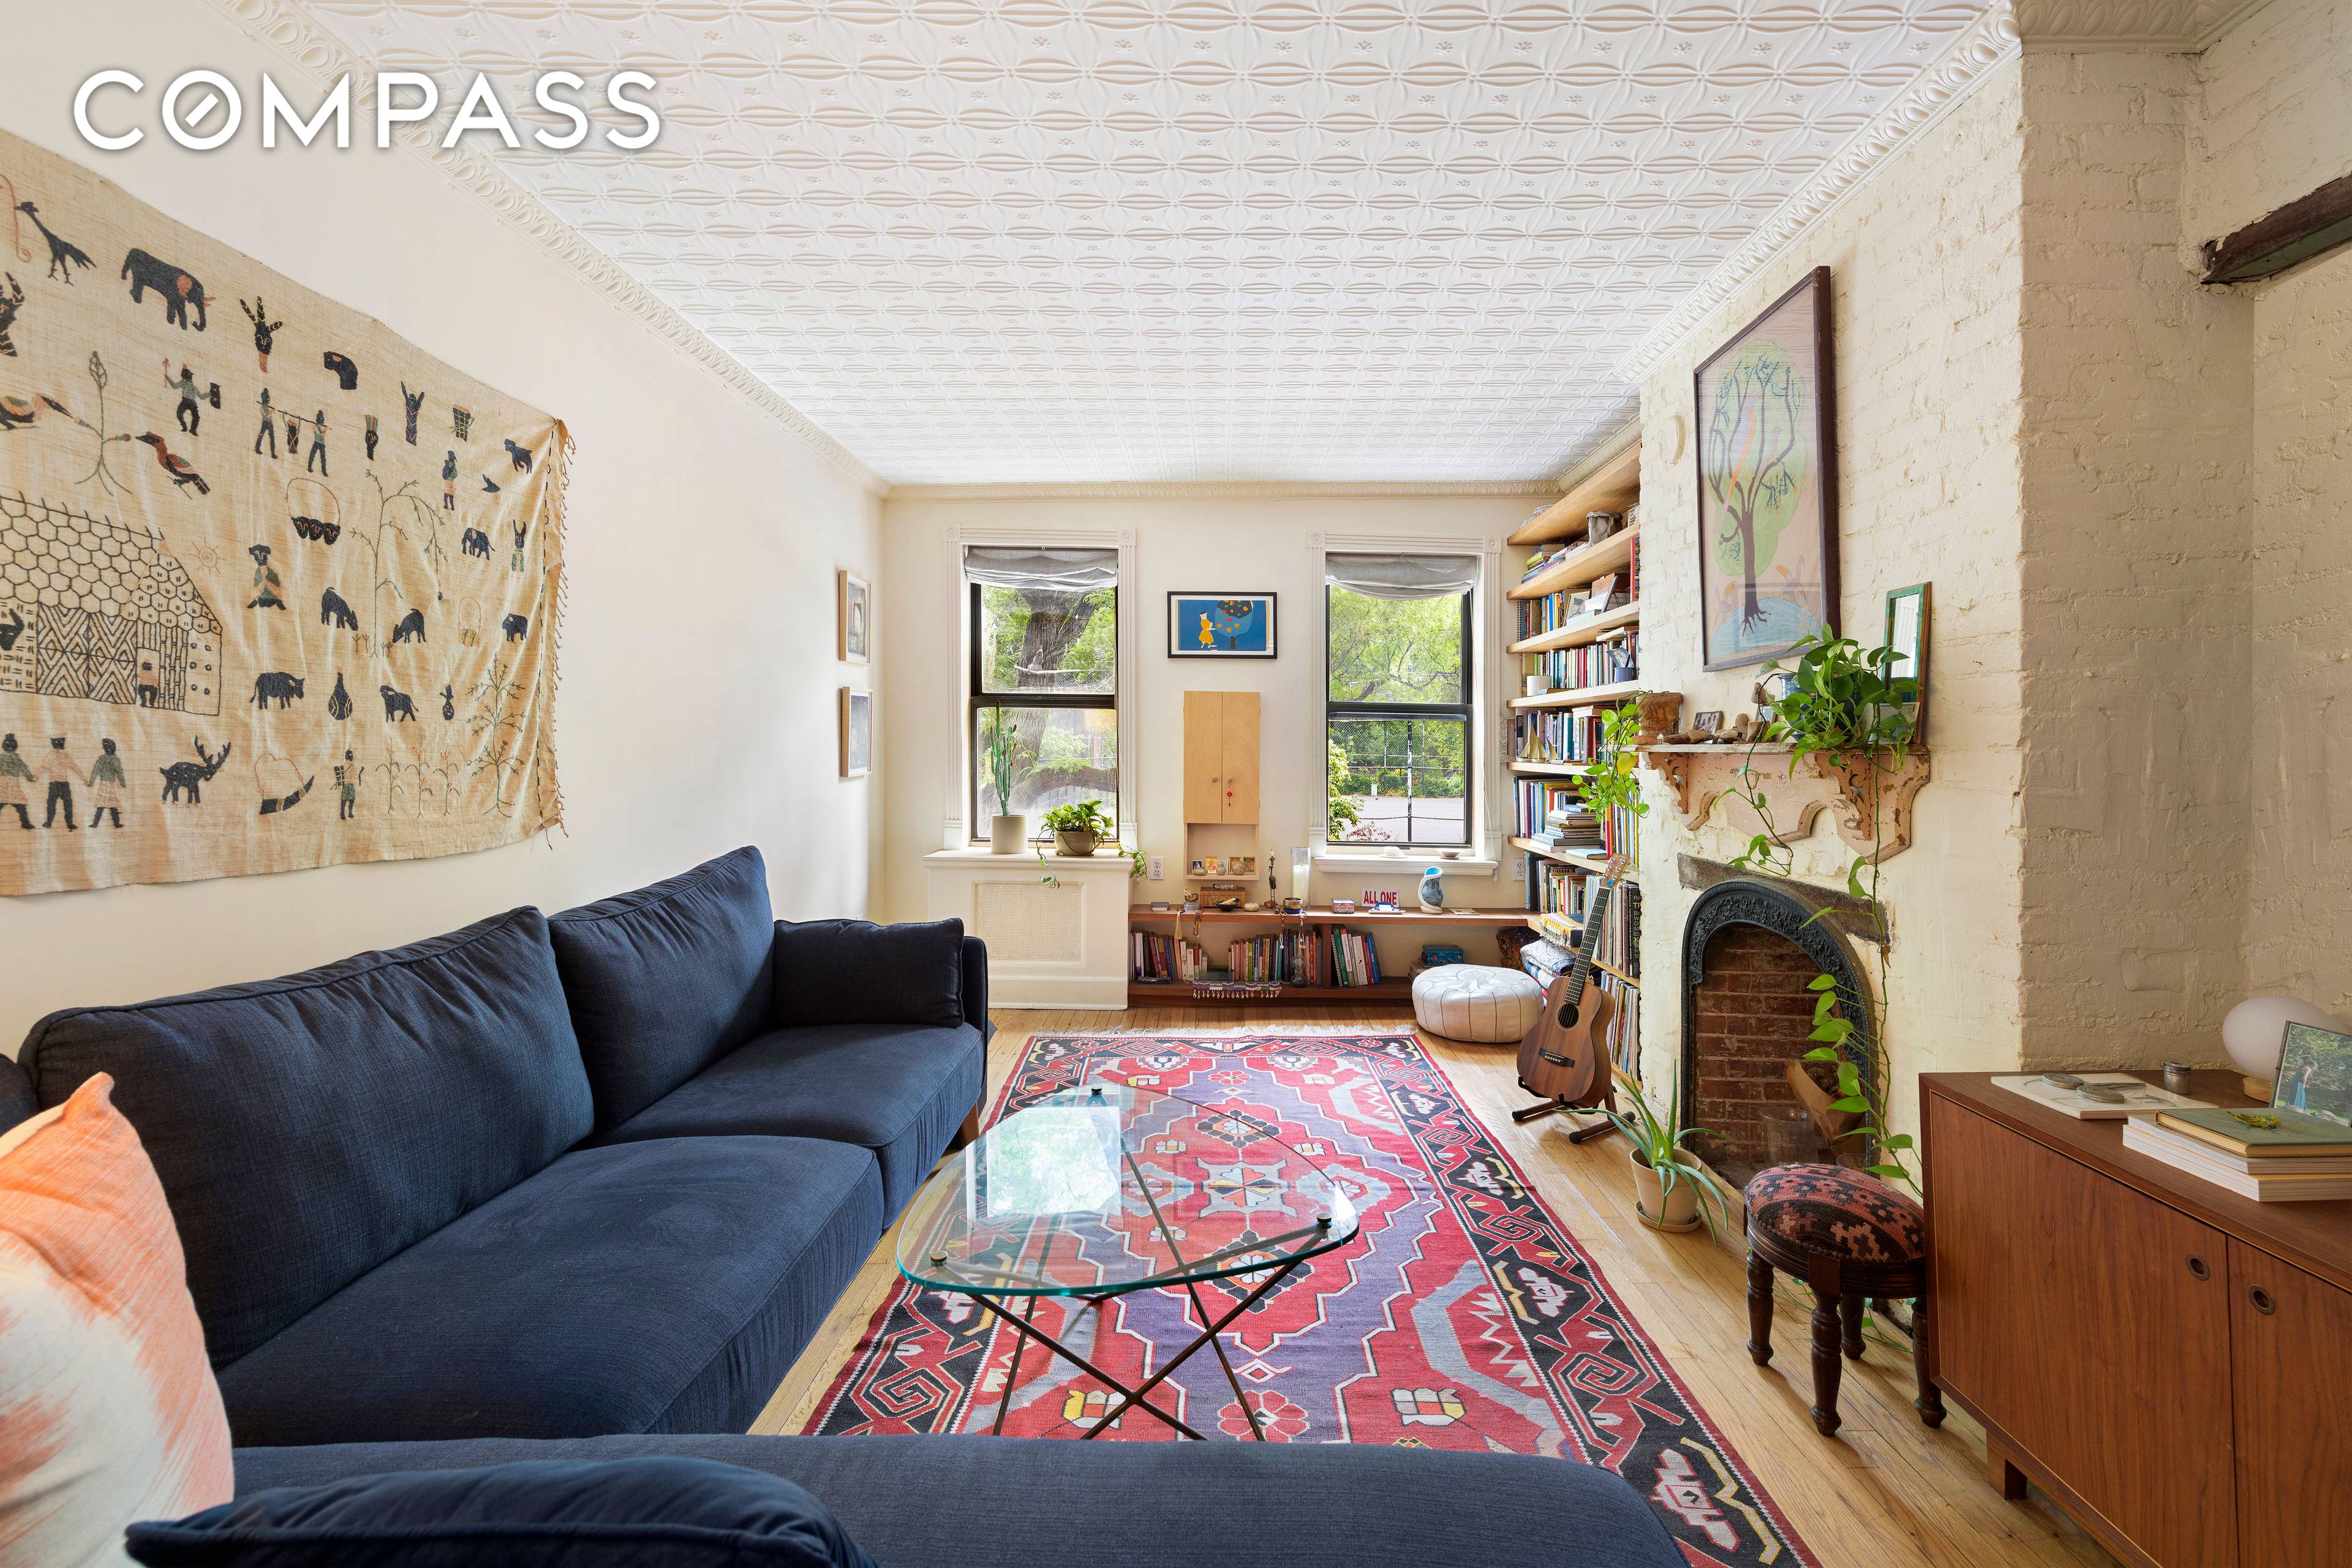 Perfectly situated at the top of Tompkins Square Park, with treetop views from the large living room, this Billy Cotton designed one bedroom exudes East Village charm.